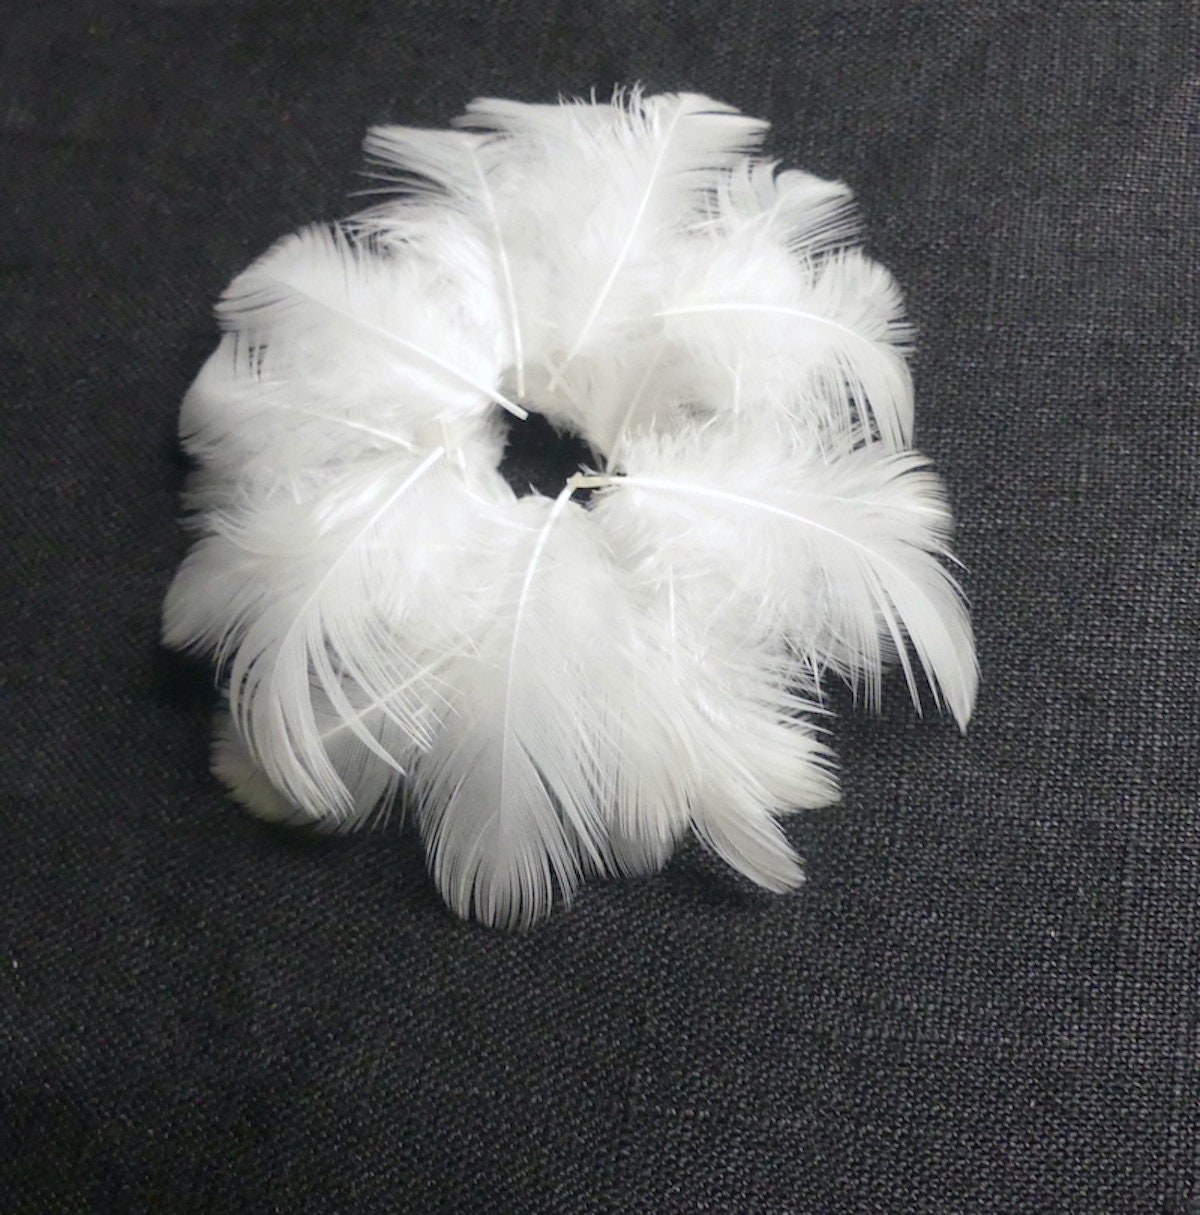 White Feathers 